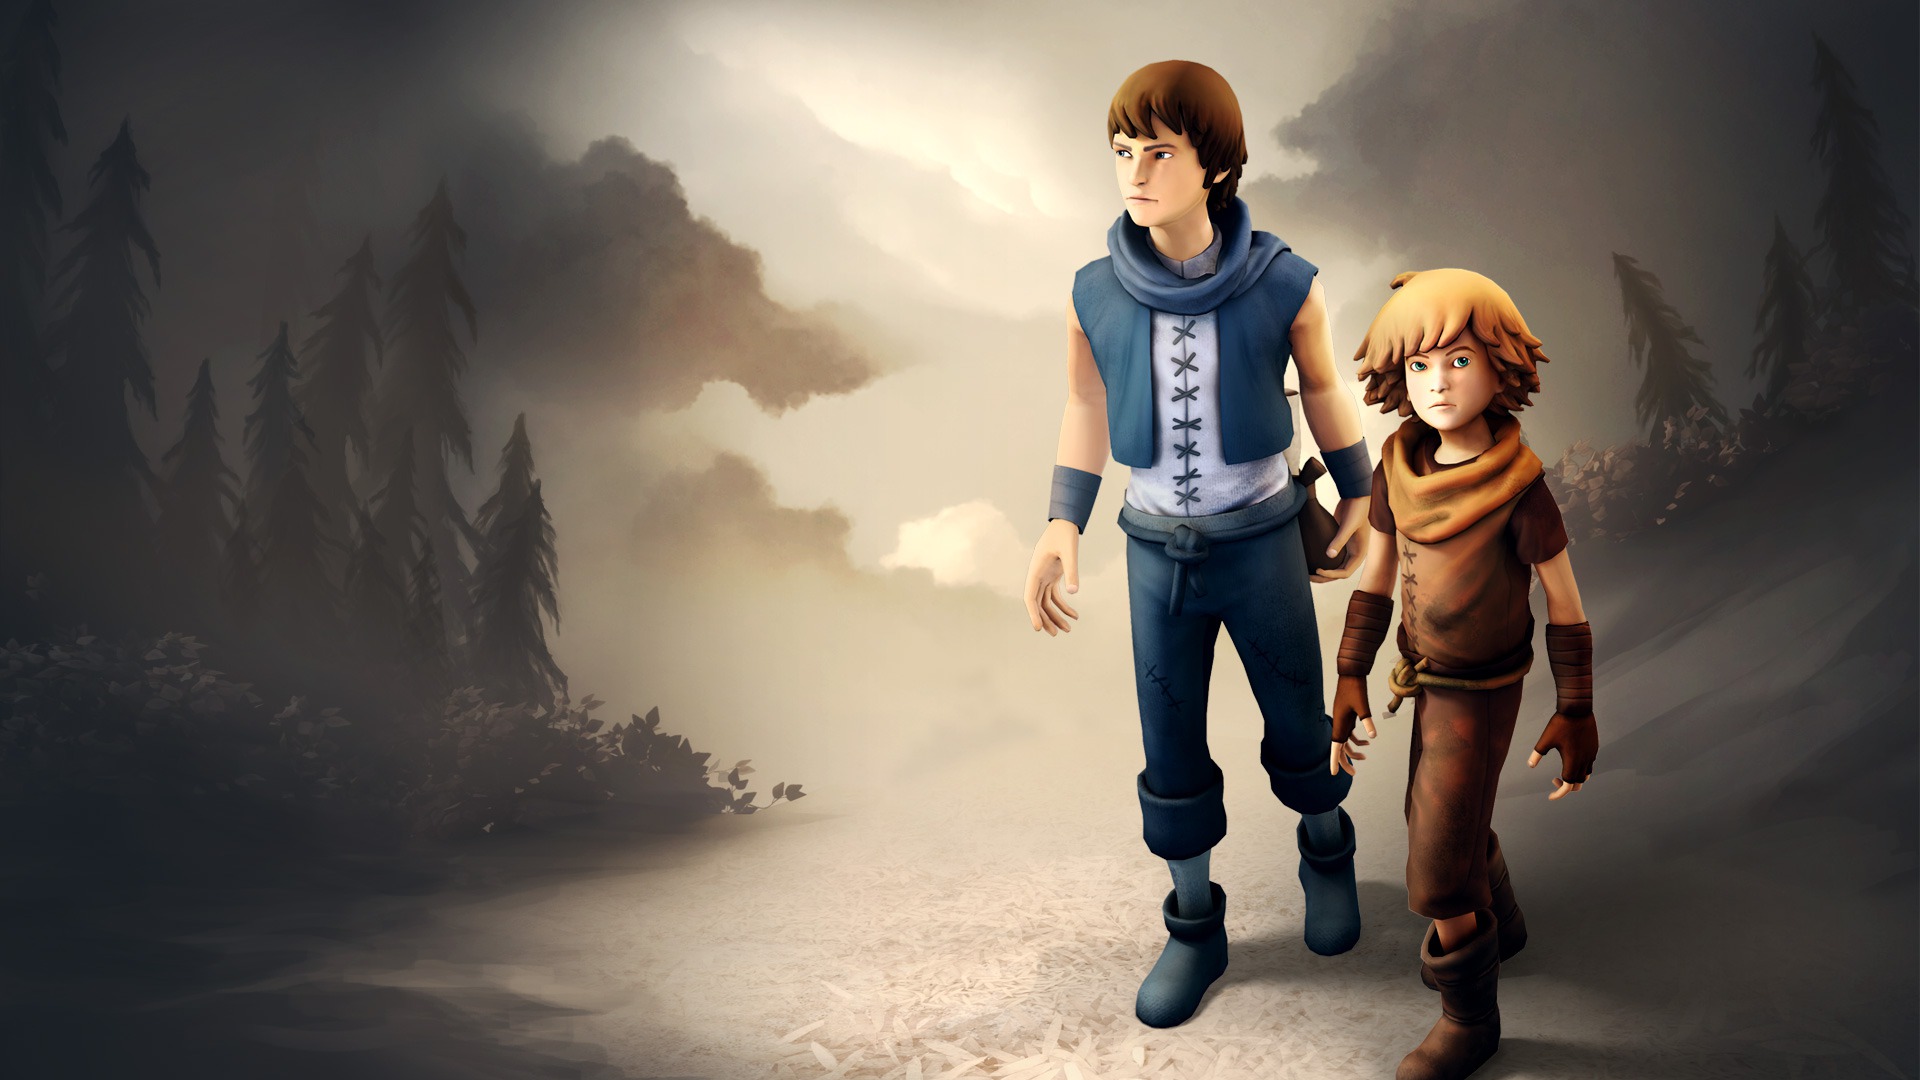 brothers a tale of two sons two player download free